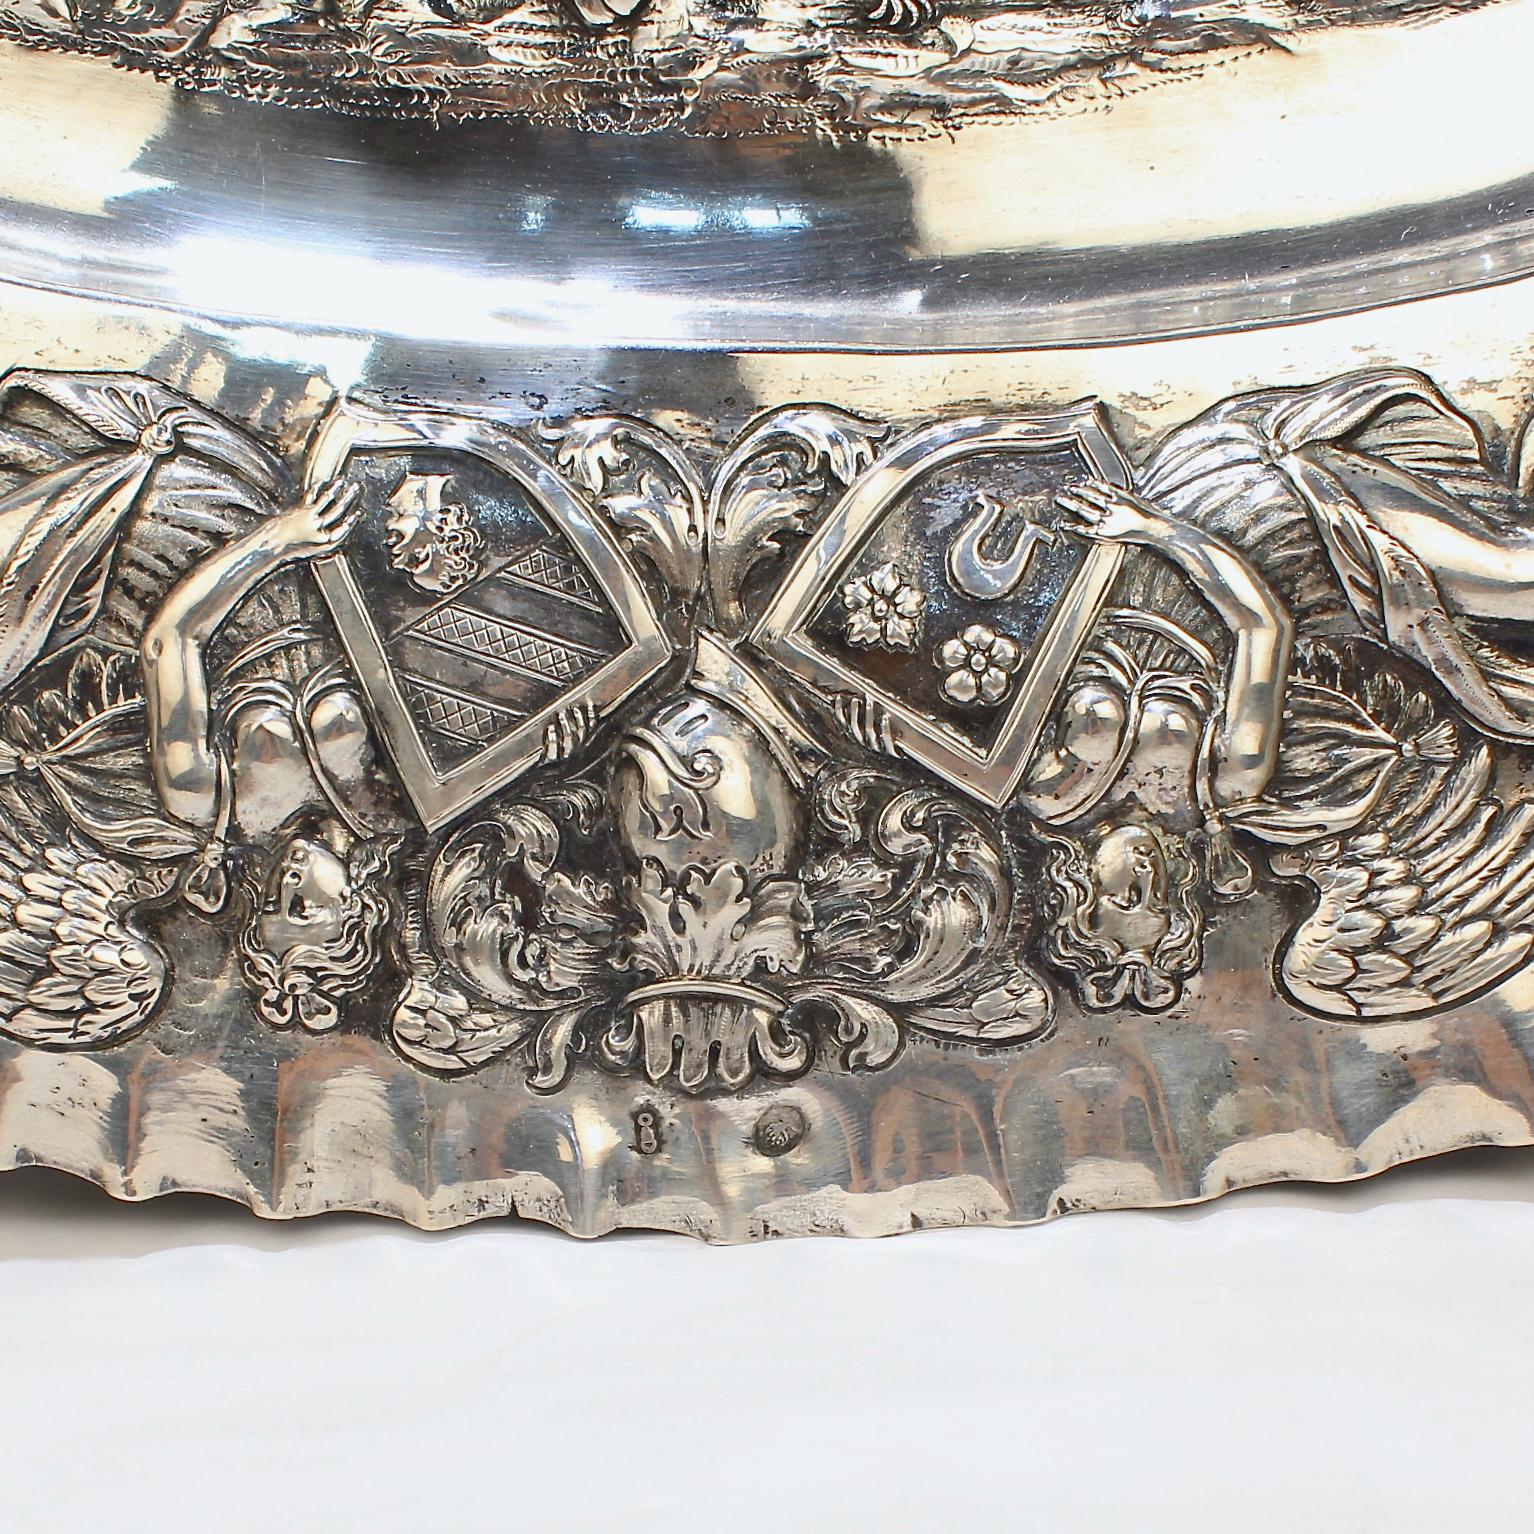 Antique German Renaissance Revival 800 Solid Silver Repousse Tray or Charger 7